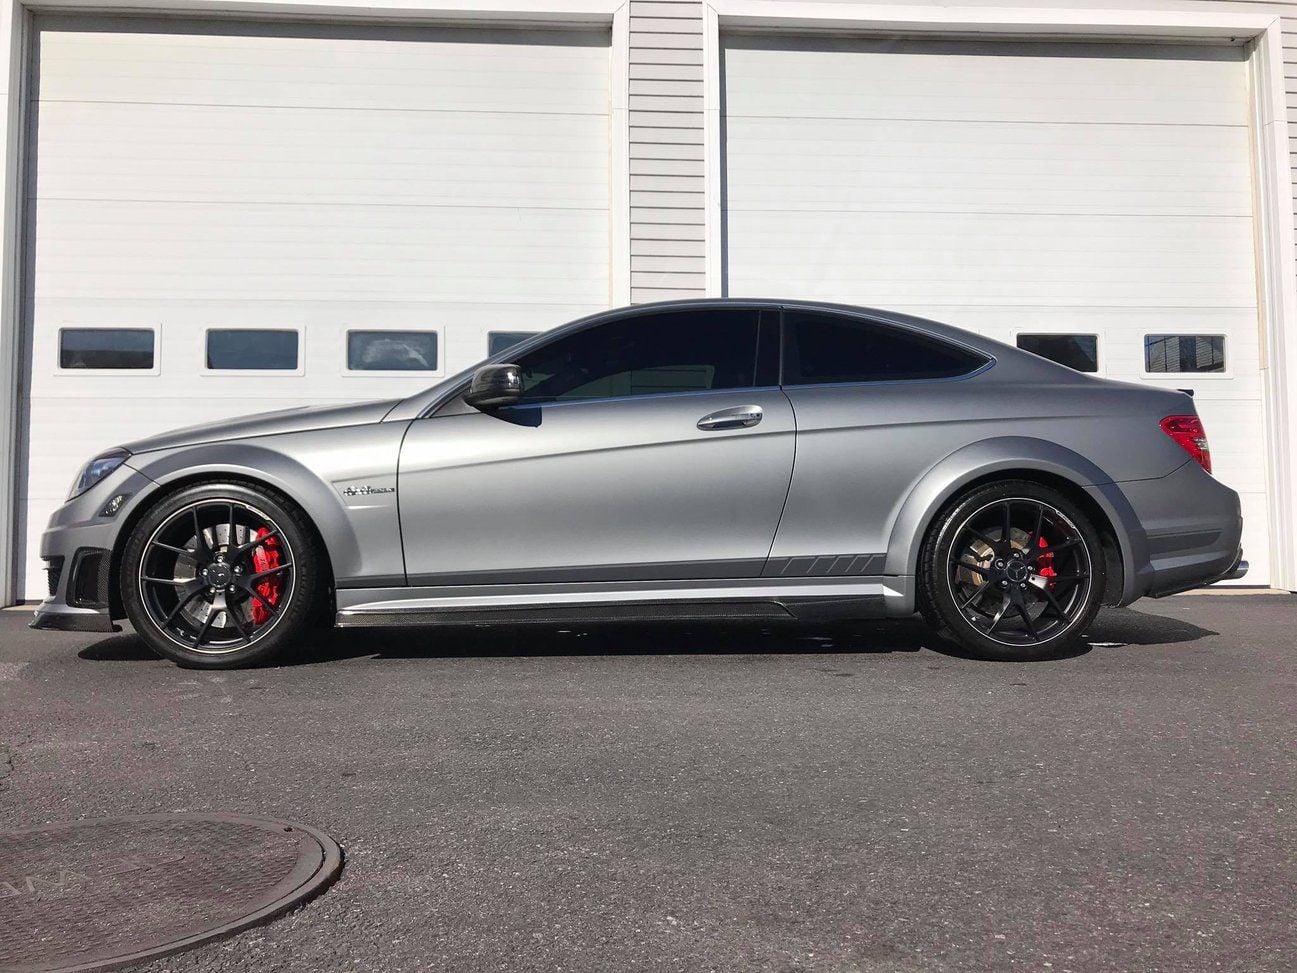 2015 Mercedes-Benz C63 AMG - FS: 15" C63 507 Edition Matte Grey (HMS) - Used - VIN WDDGJ7HB3FG373565 - 11,000 Miles - 8 cyl - 2WD - Automatic - Coupe - Gray - Weston, MA 02493, United States